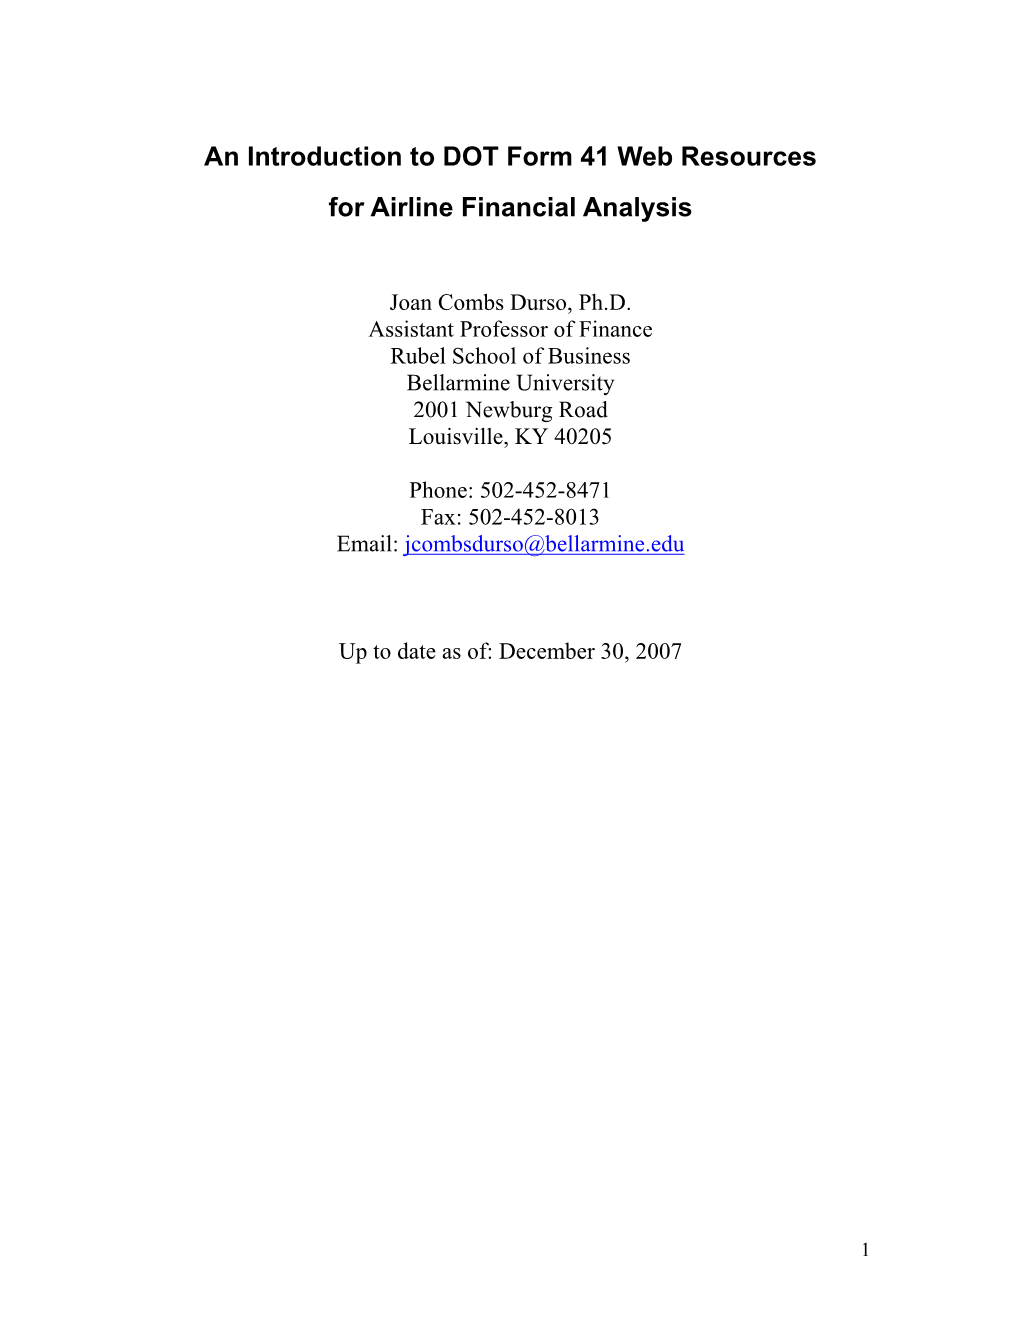 An Introduction to DOT Form 41 Web Resources for Airline Financial Analysis